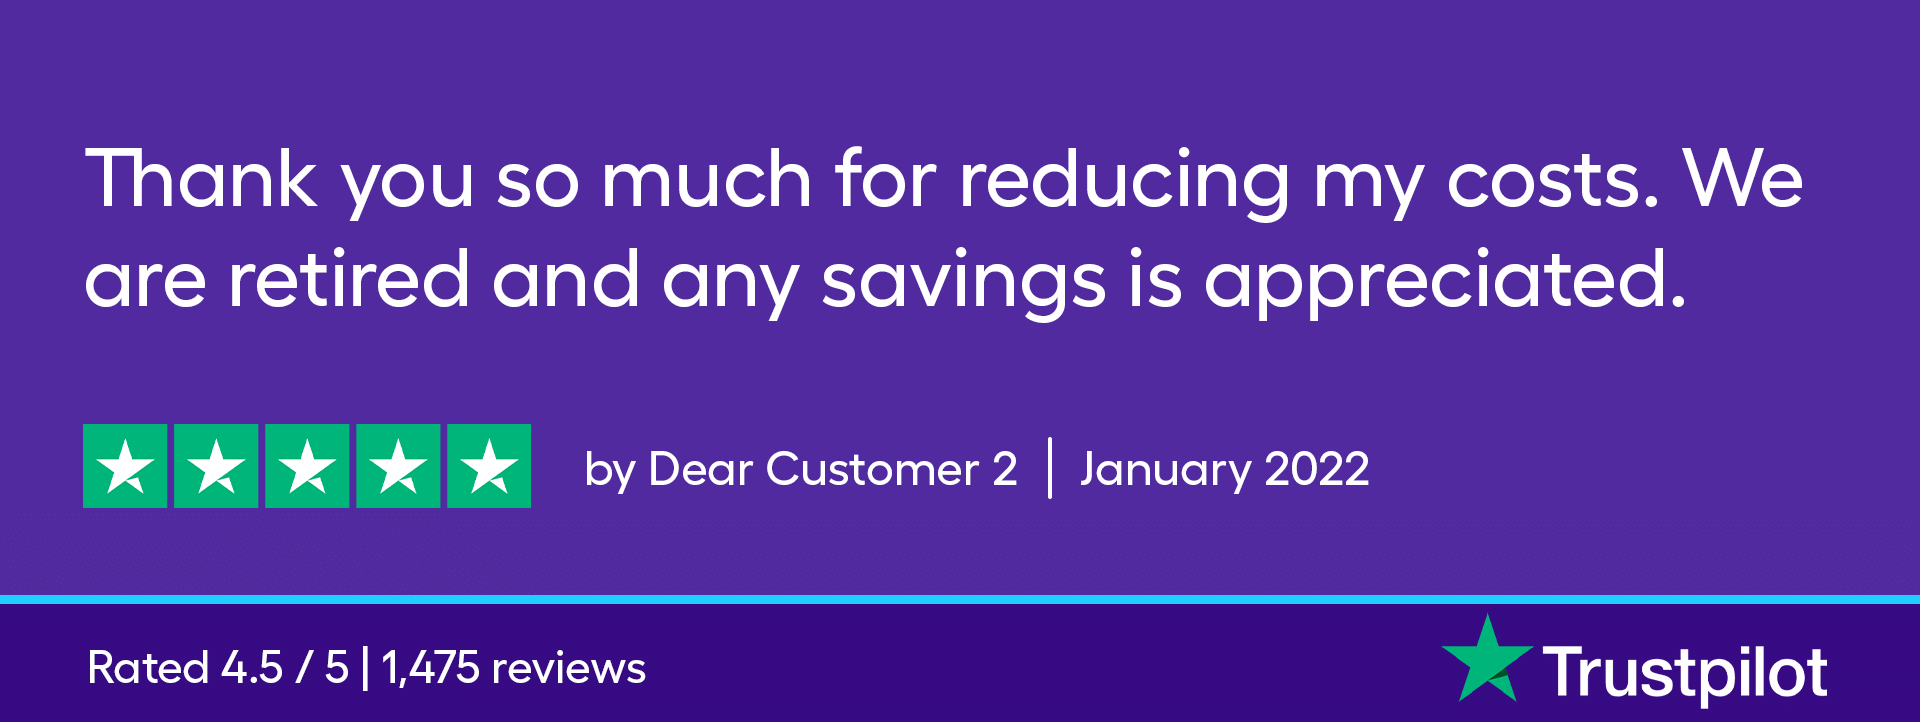 Thank you so much for reducing my costs. We are retired and any savings is appreciated. 